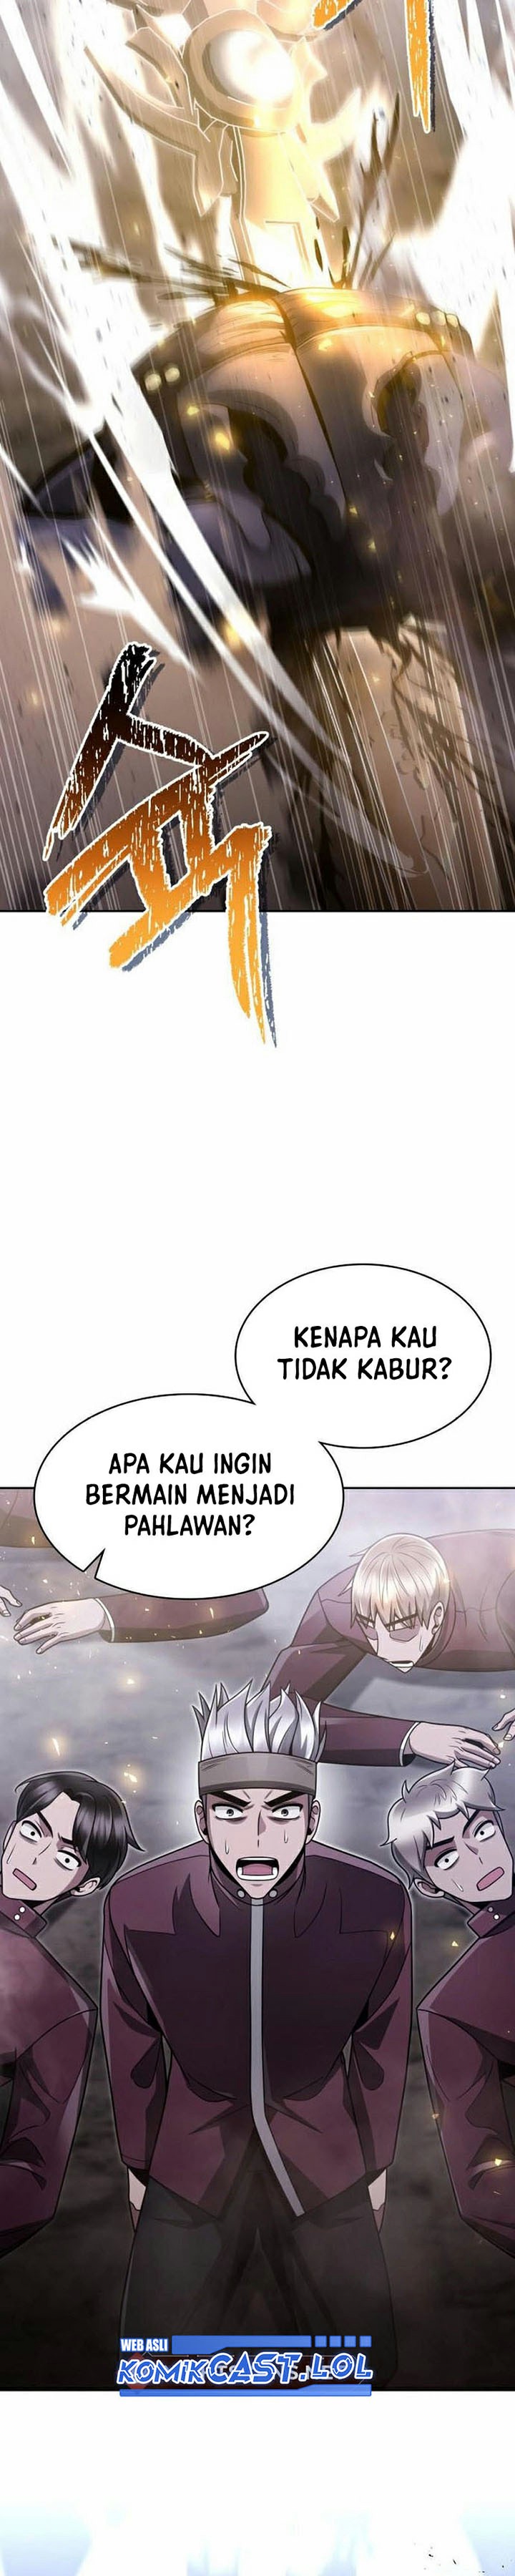 Dilarang COPAS - situs resmi www.mangacanblog.com - Komik clever cleaning life of the returned genius hunter 060 - chapter 60 61 Indonesia clever cleaning life of the returned genius hunter 060 - chapter 60 Terbaru 20|Baca Manga Komik Indonesia|Mangacan